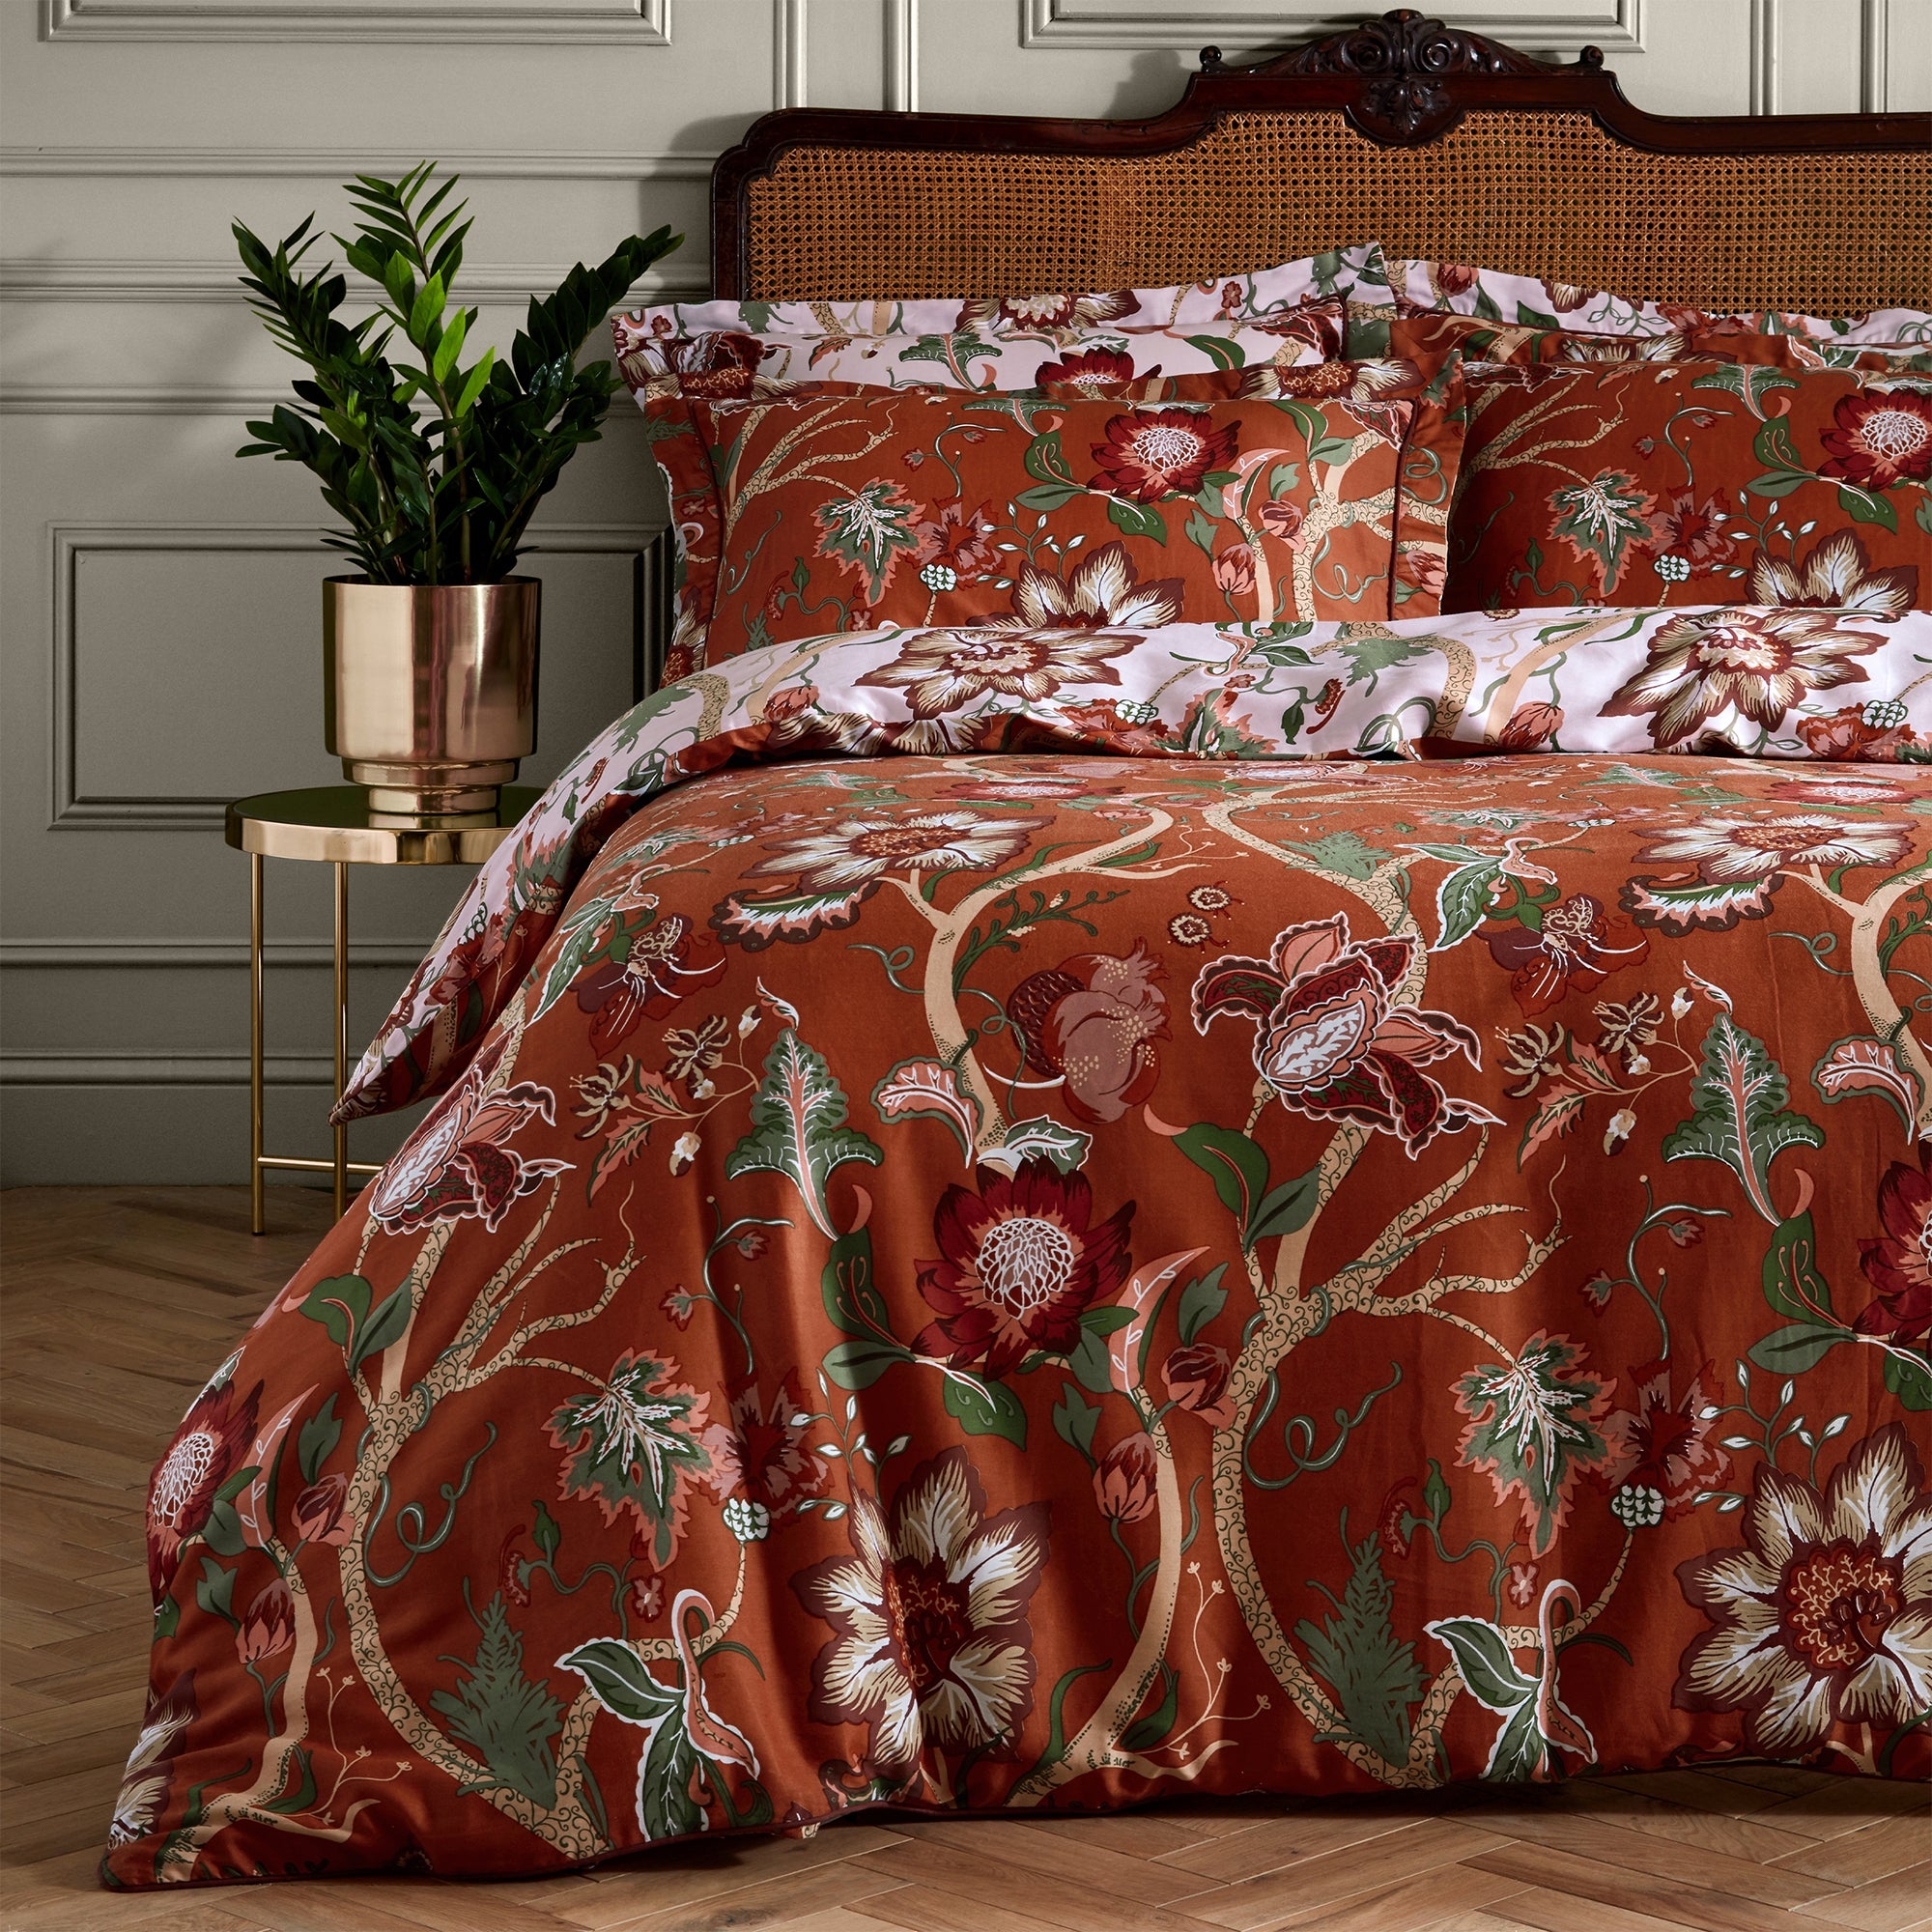 Paoletti Botanist Rust 100 Cotton Reversible Duvet Cover And Pillowcase Set Brown